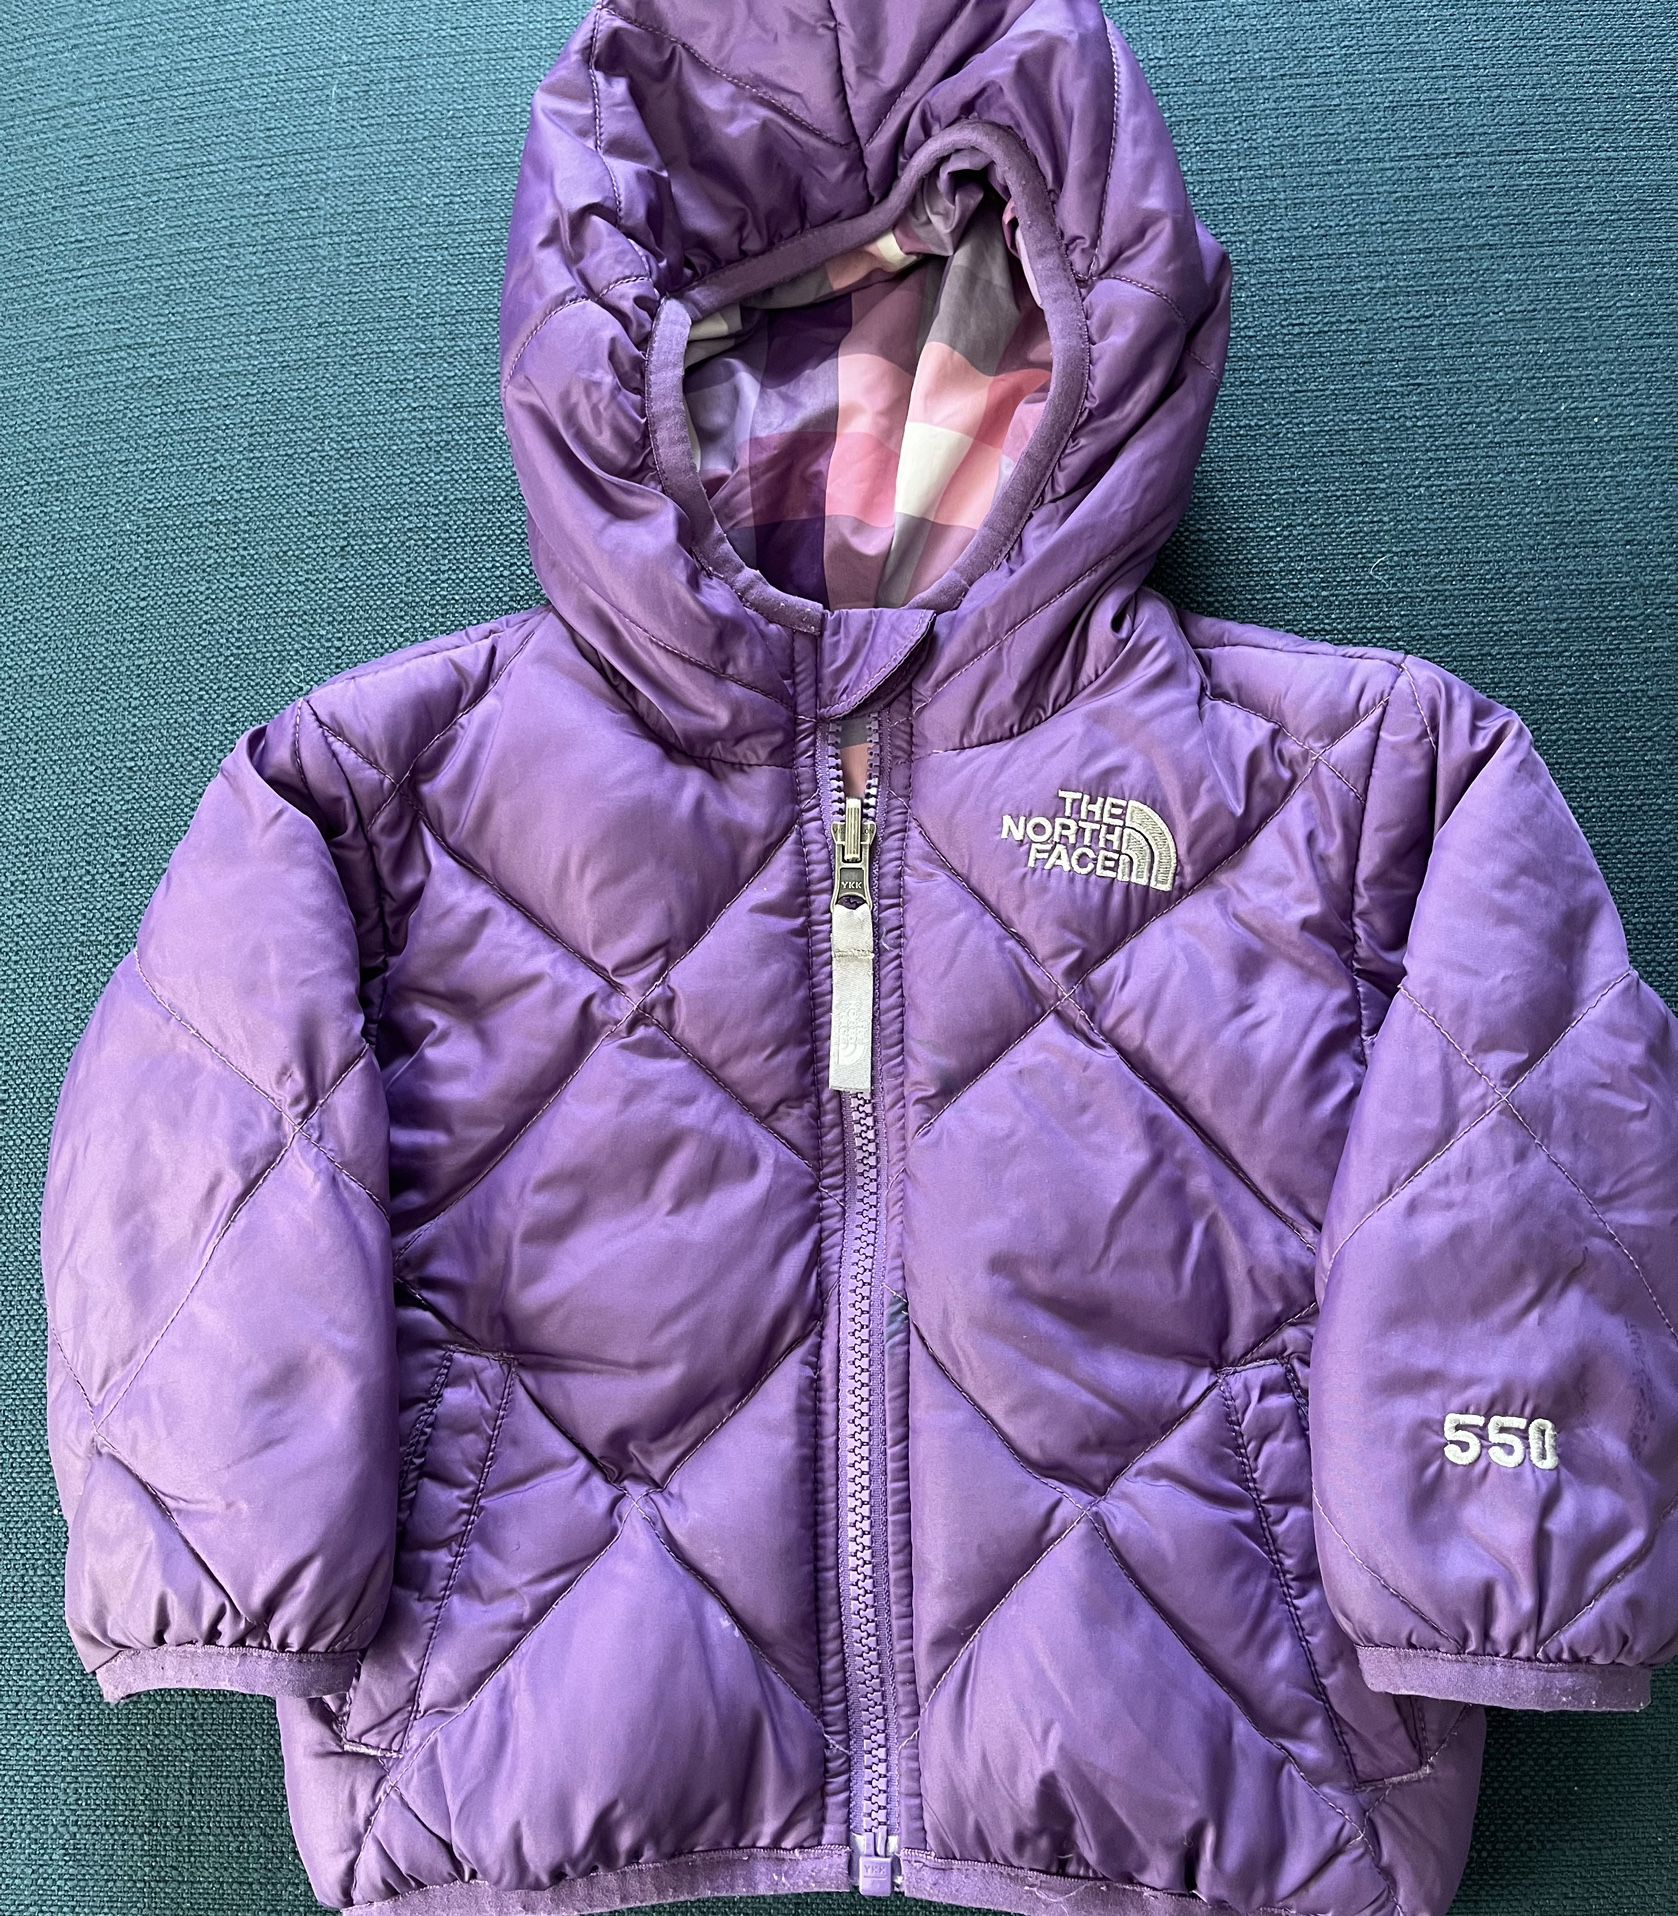 The North Face Reversible 550 Puffer Jacket 6-12 Months